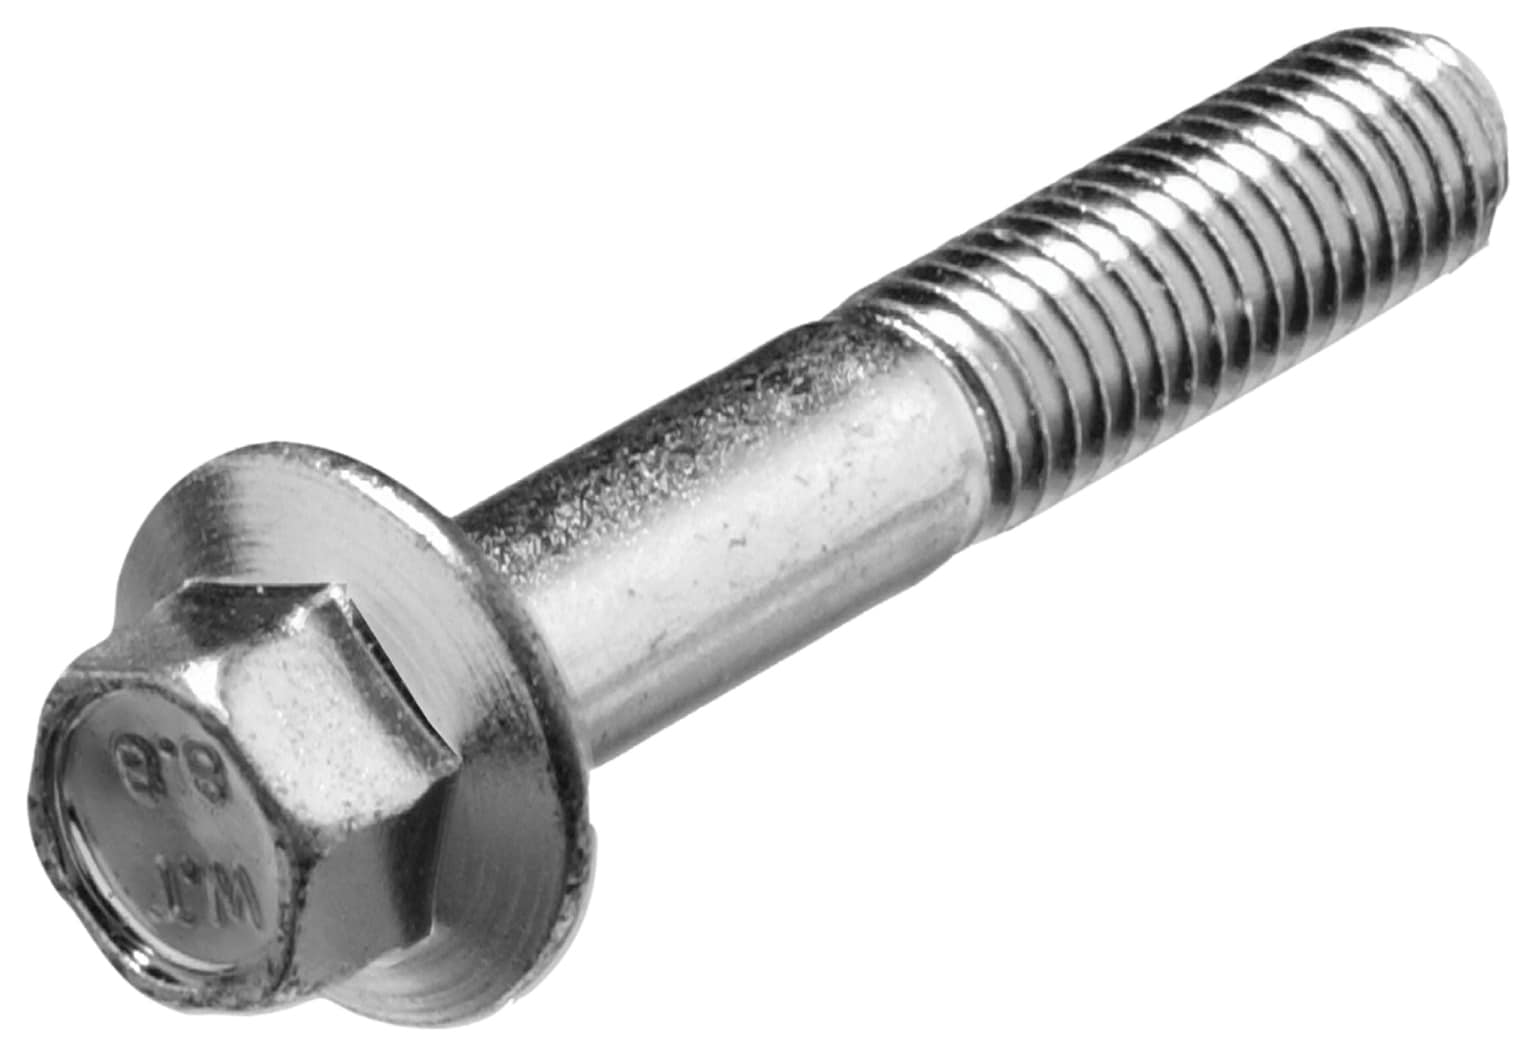 Hillman 8mm X 30mm Stainless Coarse Thread Hex Bolt 8 Count In The Hex Bolts Department At